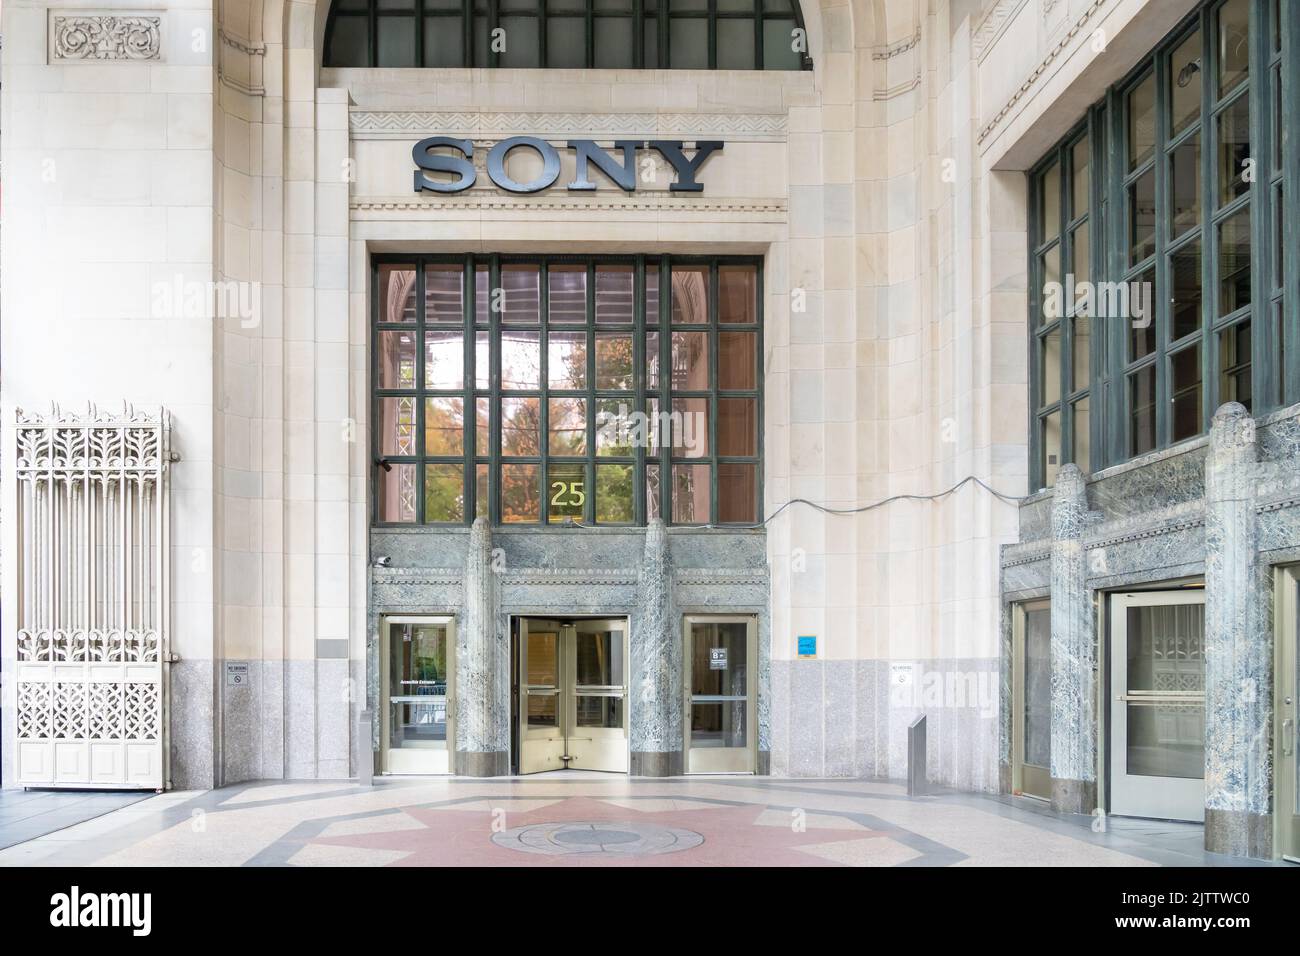 The exterior of the Sony store in the Walt Whitman Mall Shopping Center in  Huntington Station, New York Stock Photo - Alamy